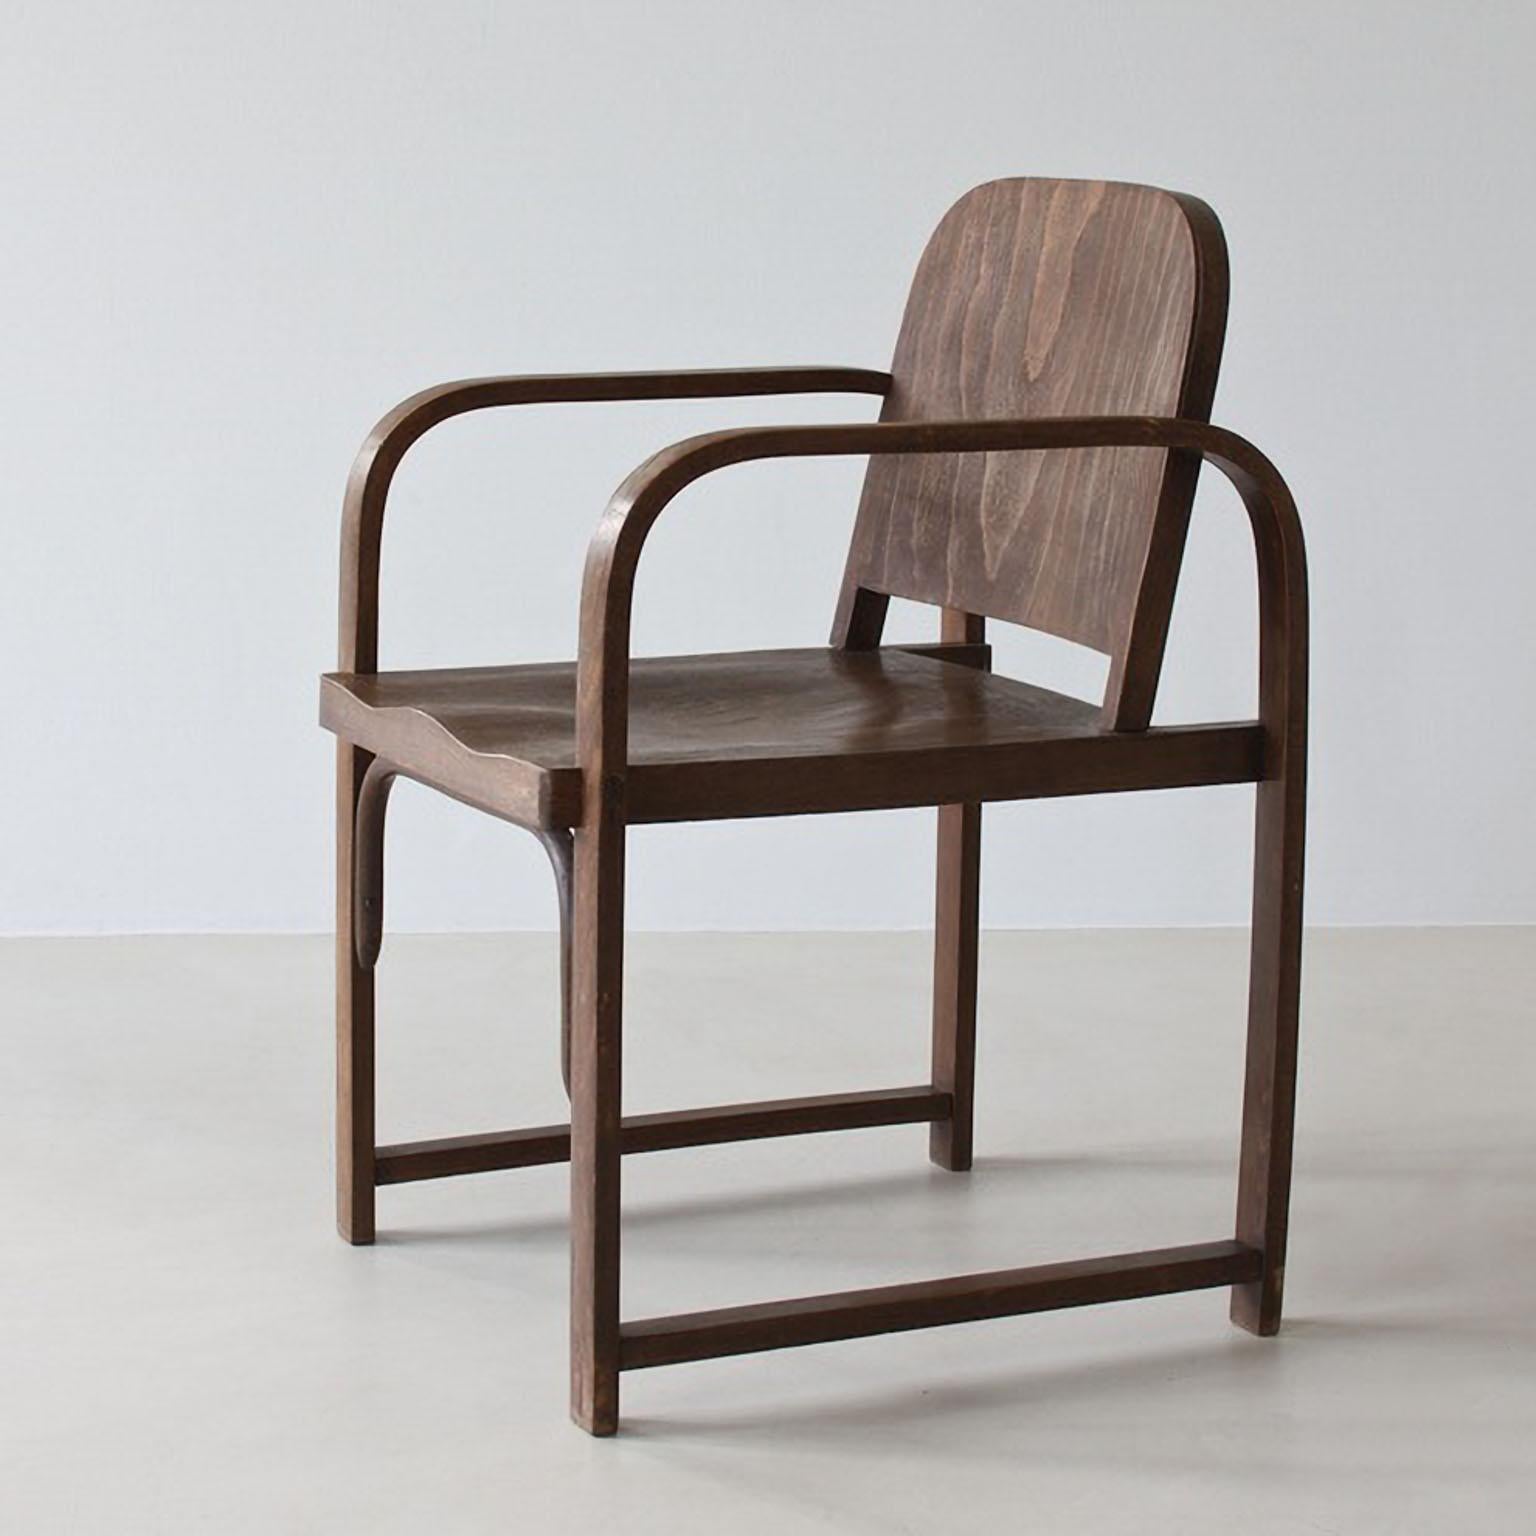 Modernist armchair modell A 745/F in stained bentwood designed by Thonet and manufactured under Thonet licence by Tatra, Slovakia, c. 1930.